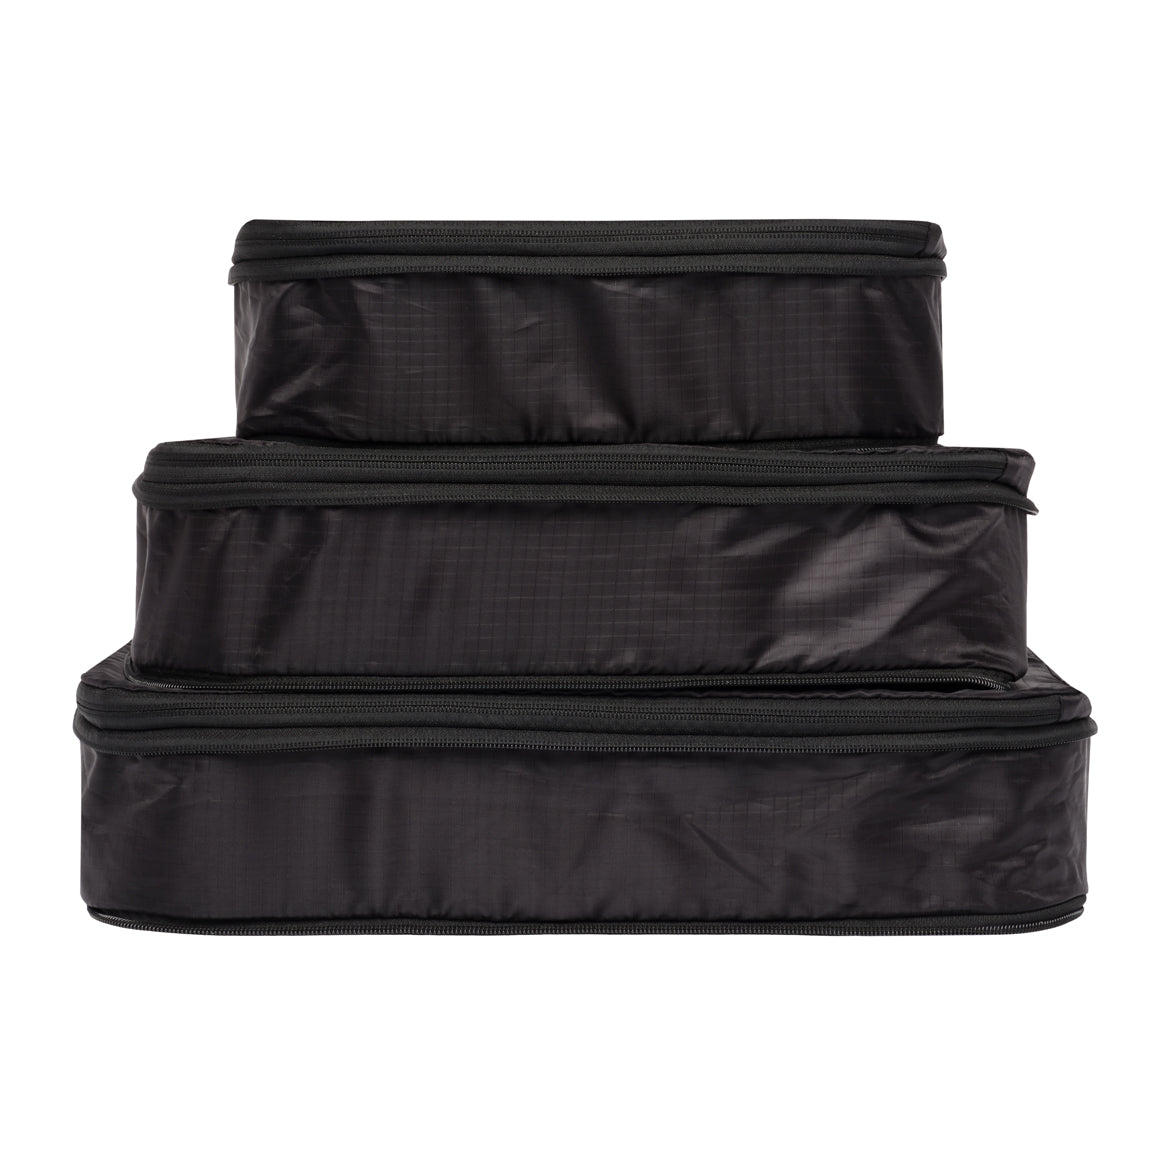 Re-cycled and Reinforced Nylon Compression Packing Cubes, 3-pack Black